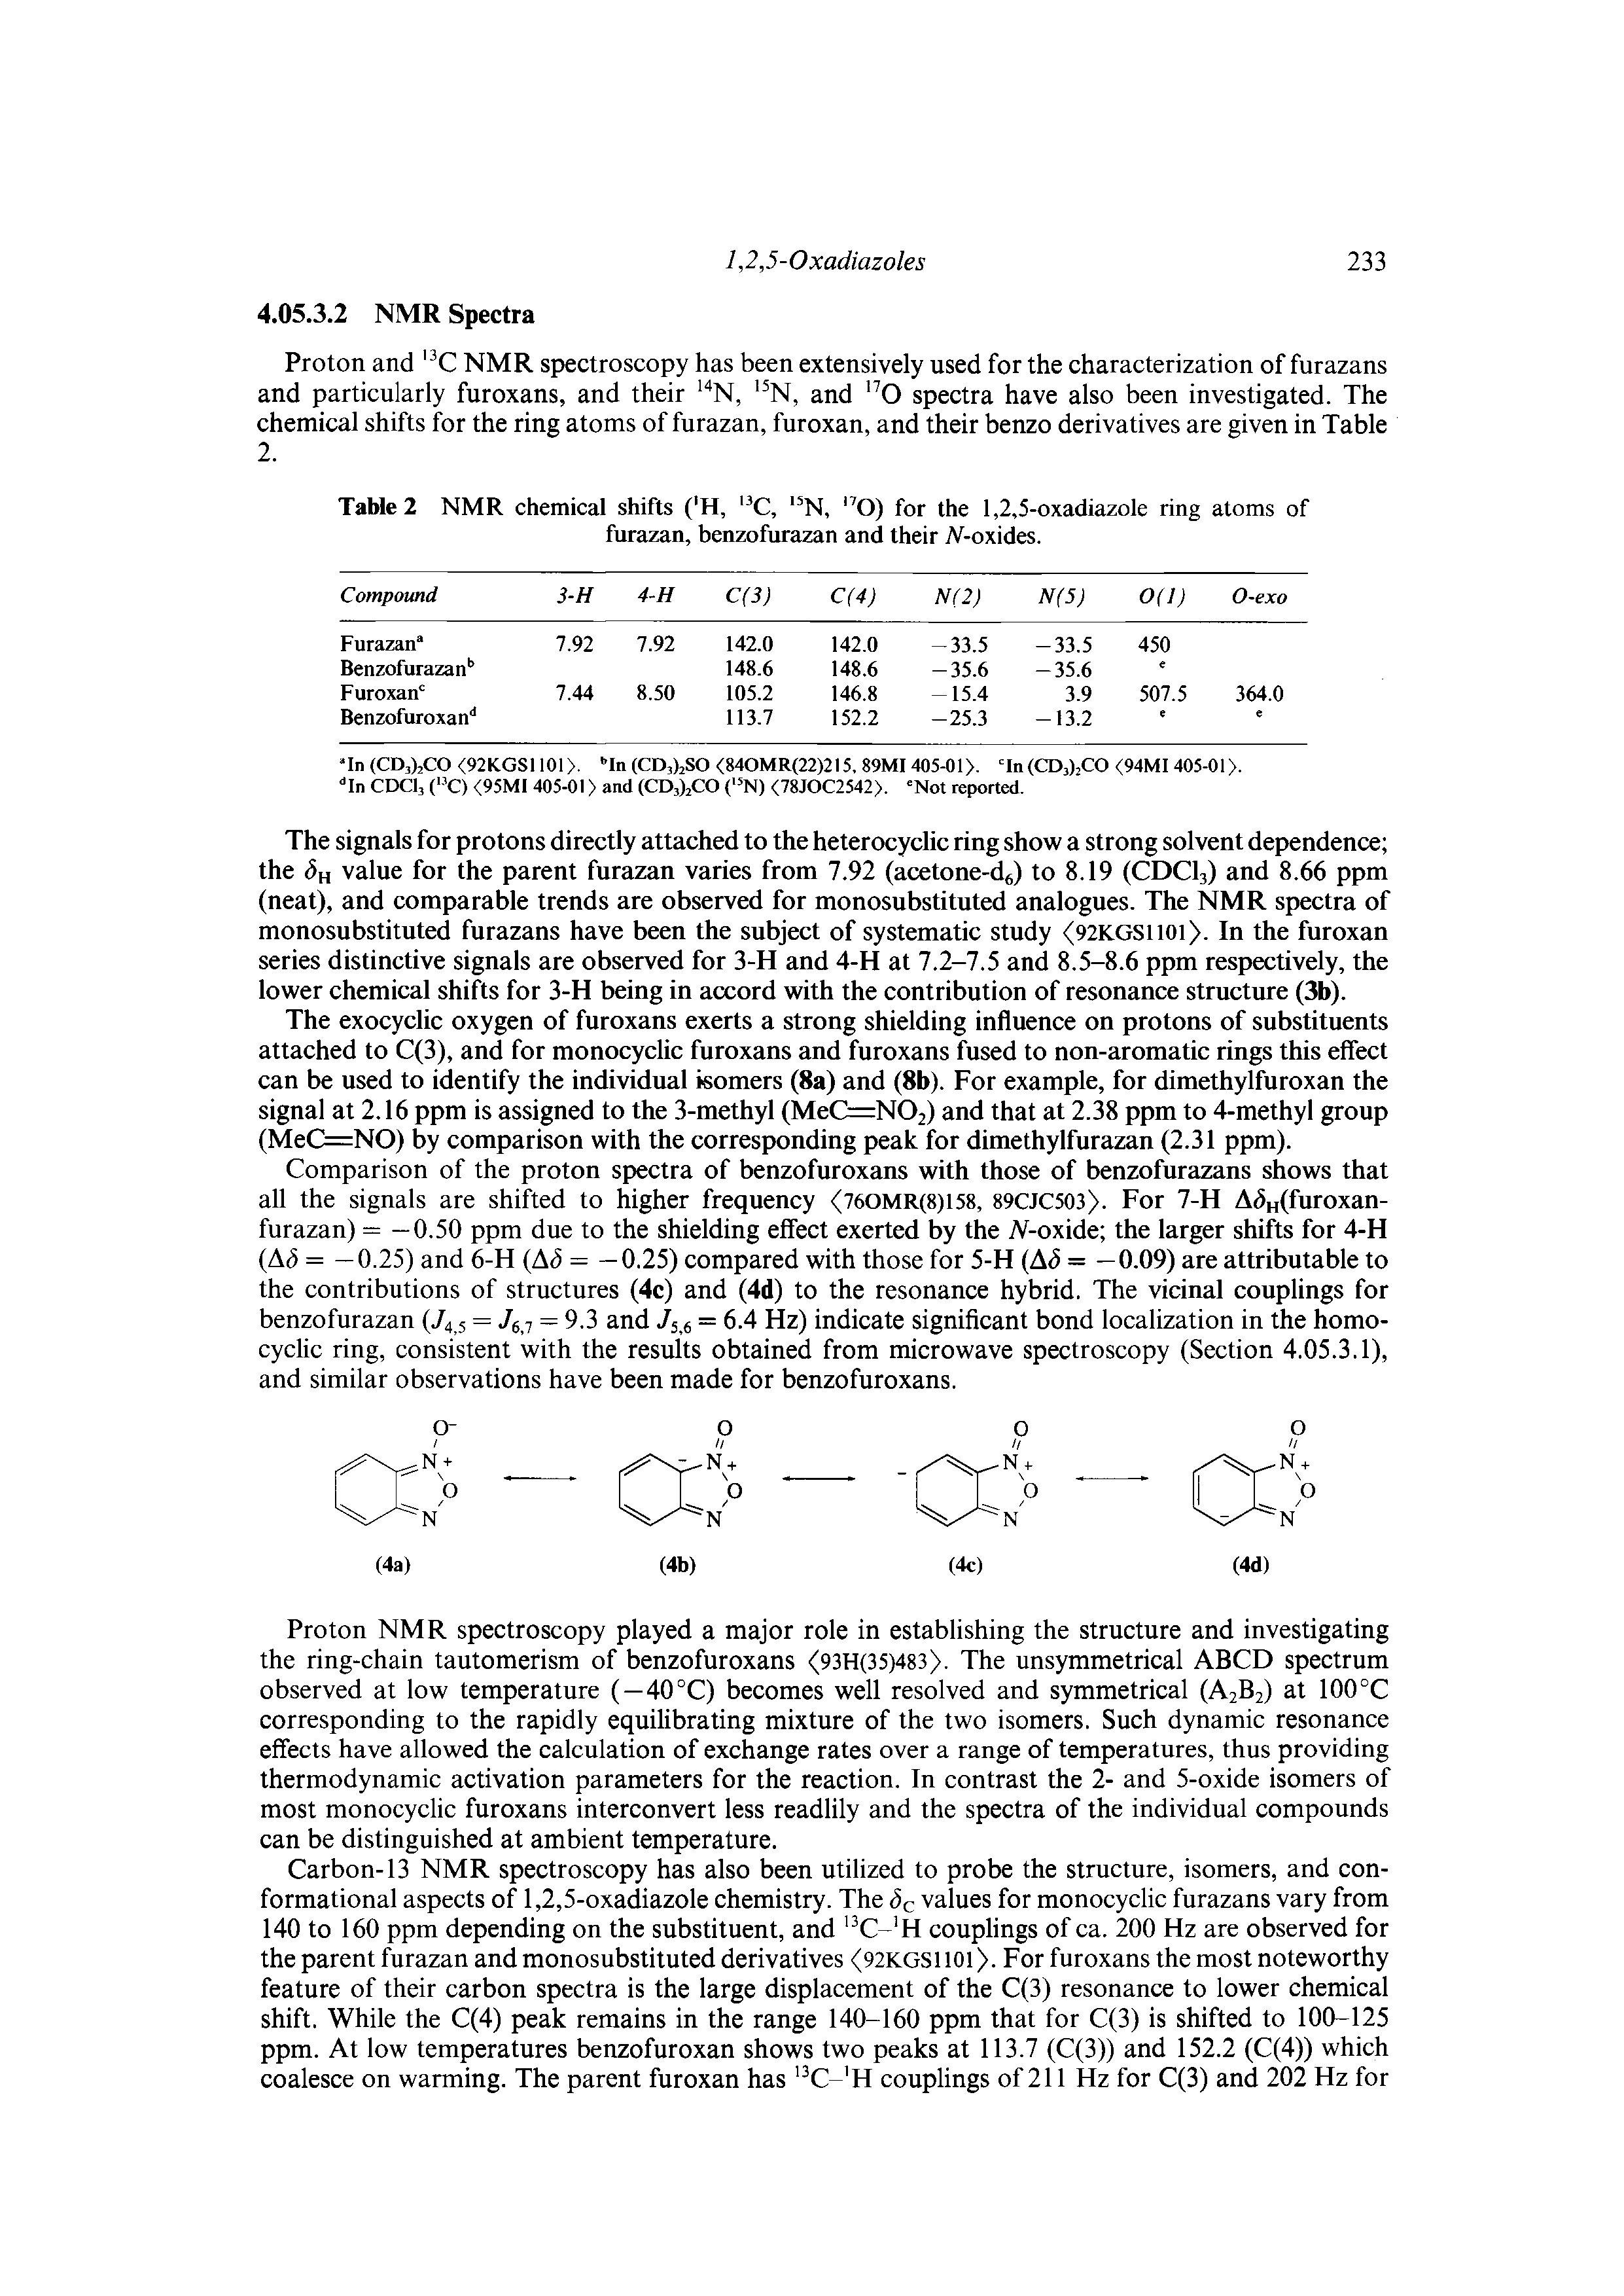 Table 2 NMR chemical shifts ( H, C, N, O) for the 1,2,5-oxadiazole ring atoms of furazan, benzofurazan and their A -oxides.